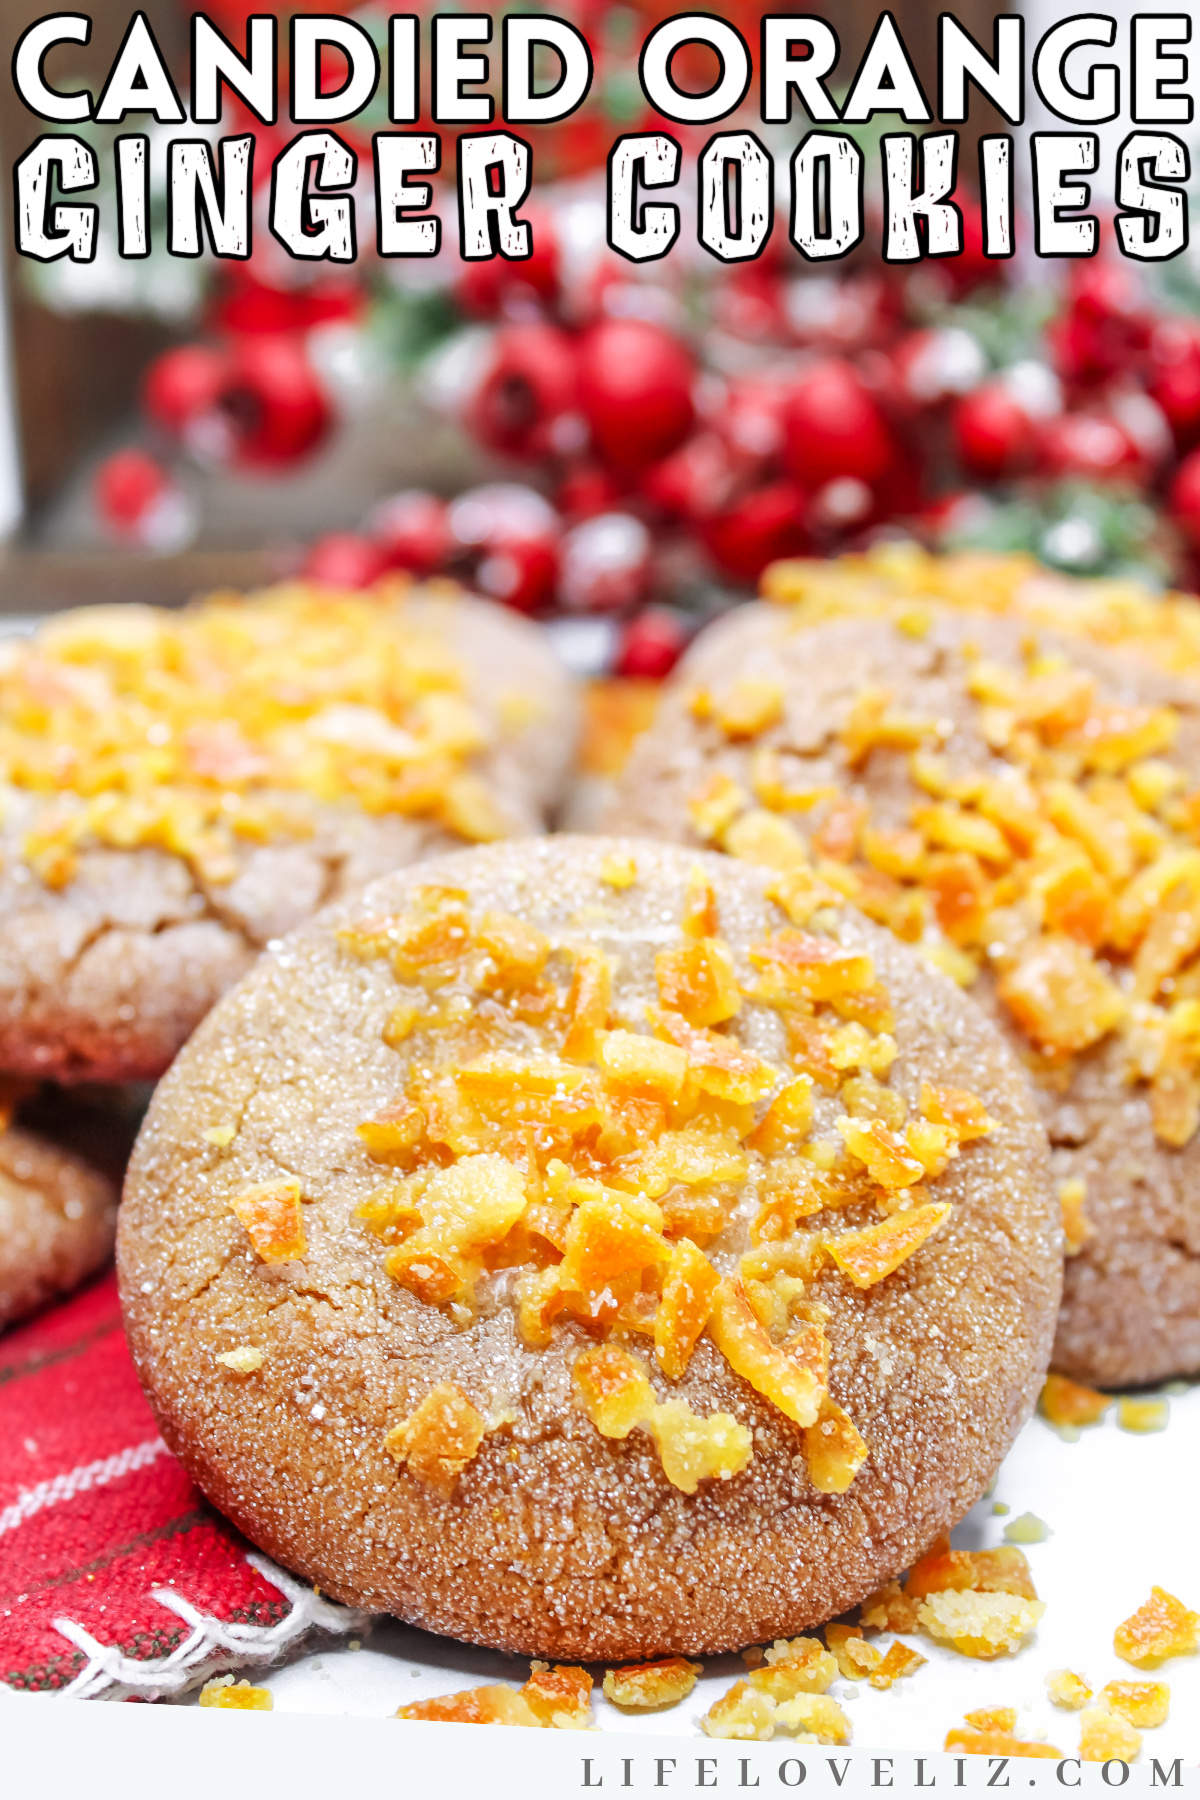 Looking for a delicious, festive cookie recipe to make this holiday season? Try these Candied Orange Ginger Cookies for your dessert table.